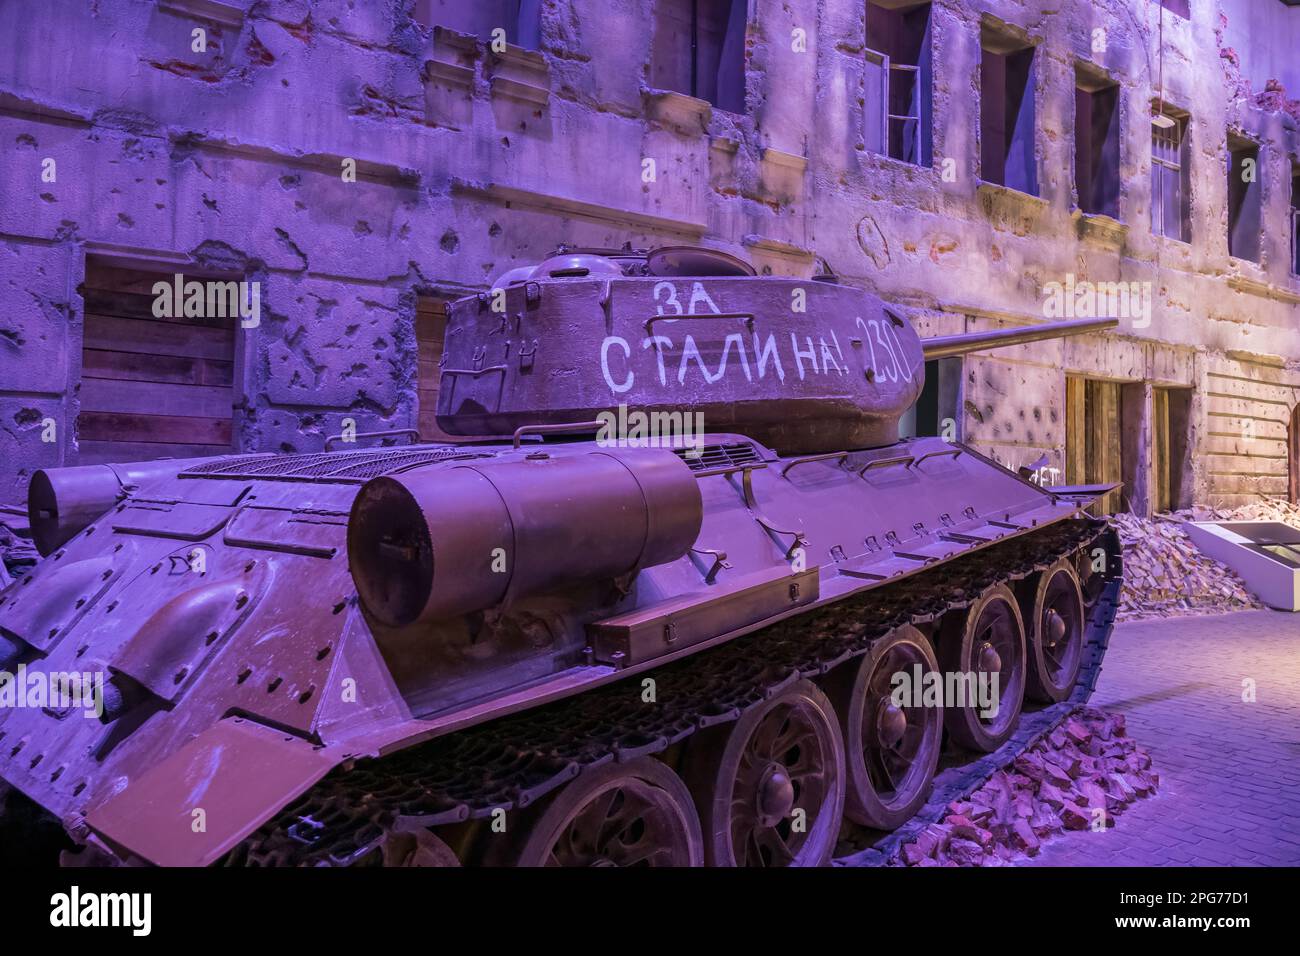 The Soviet tank T-34/85, exhibit in Museum of the Second World War in Gdansk, Poland. Stock Photo